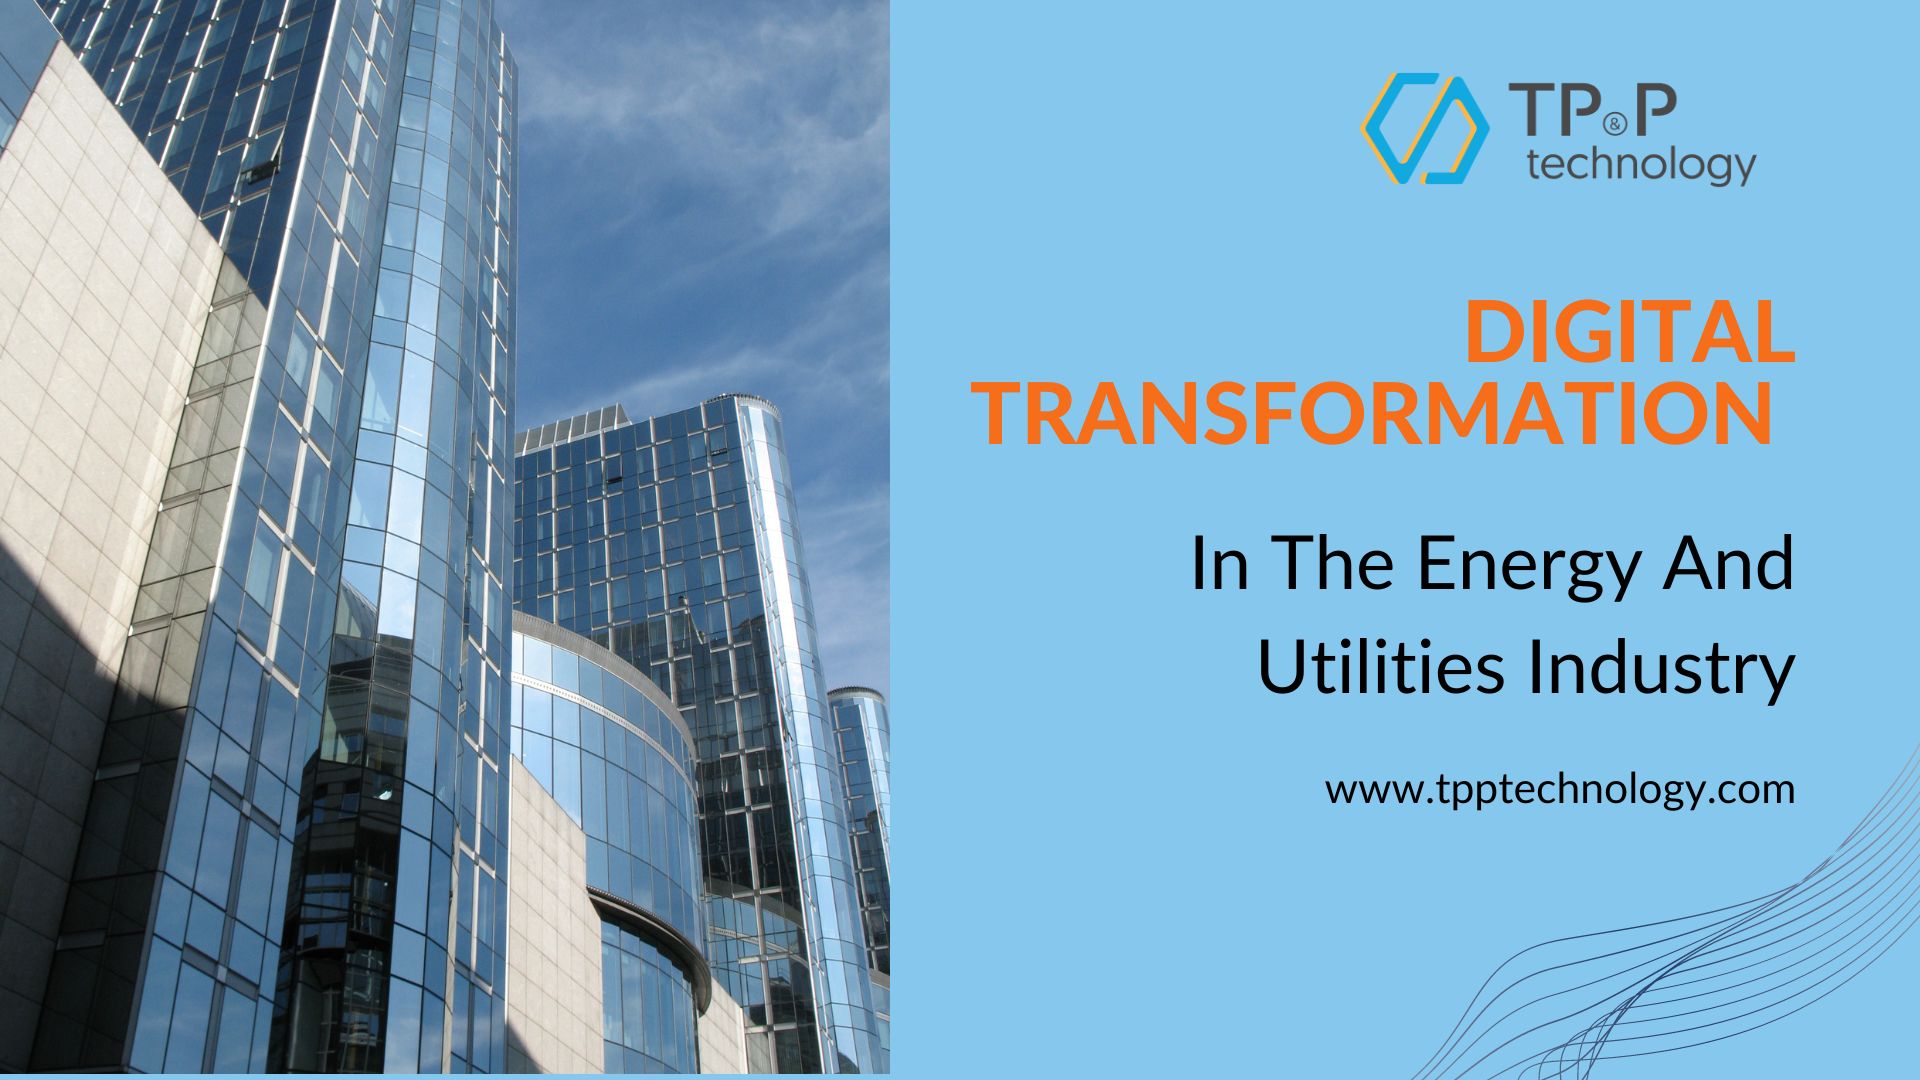 Digital Transformation In The Energy and Utilities Industry